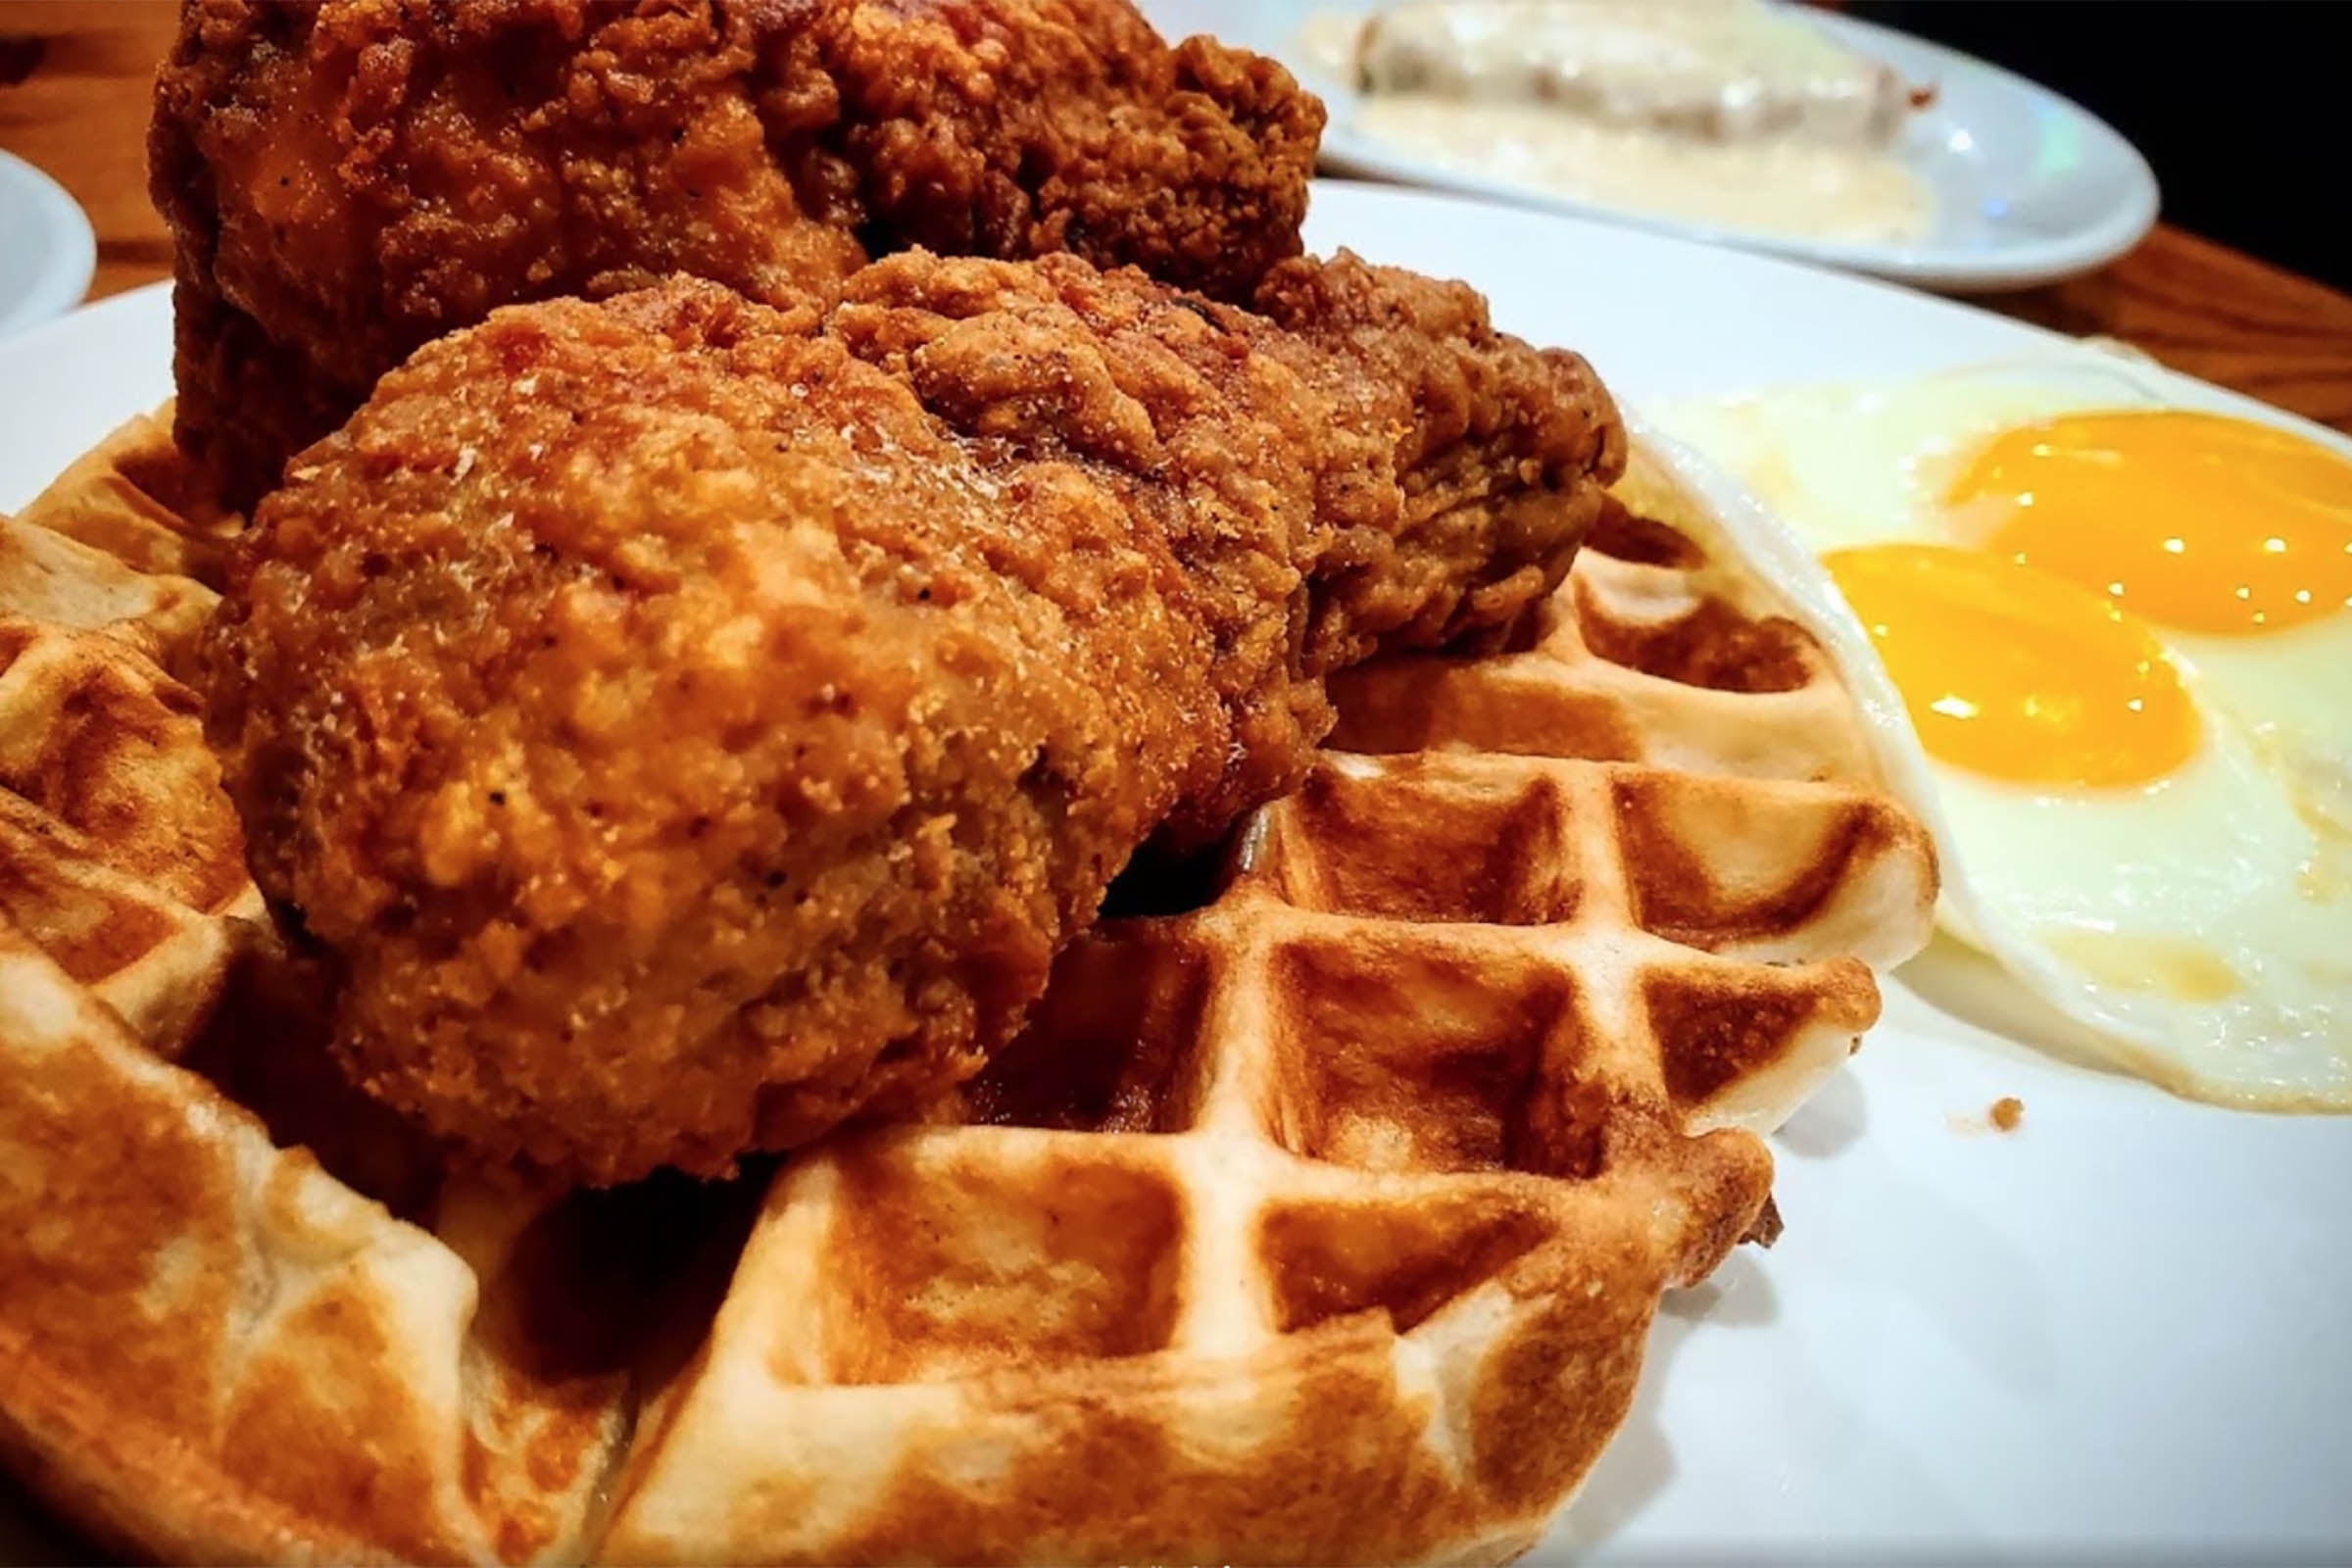 14. Fried Chicken & Waffles With Honey